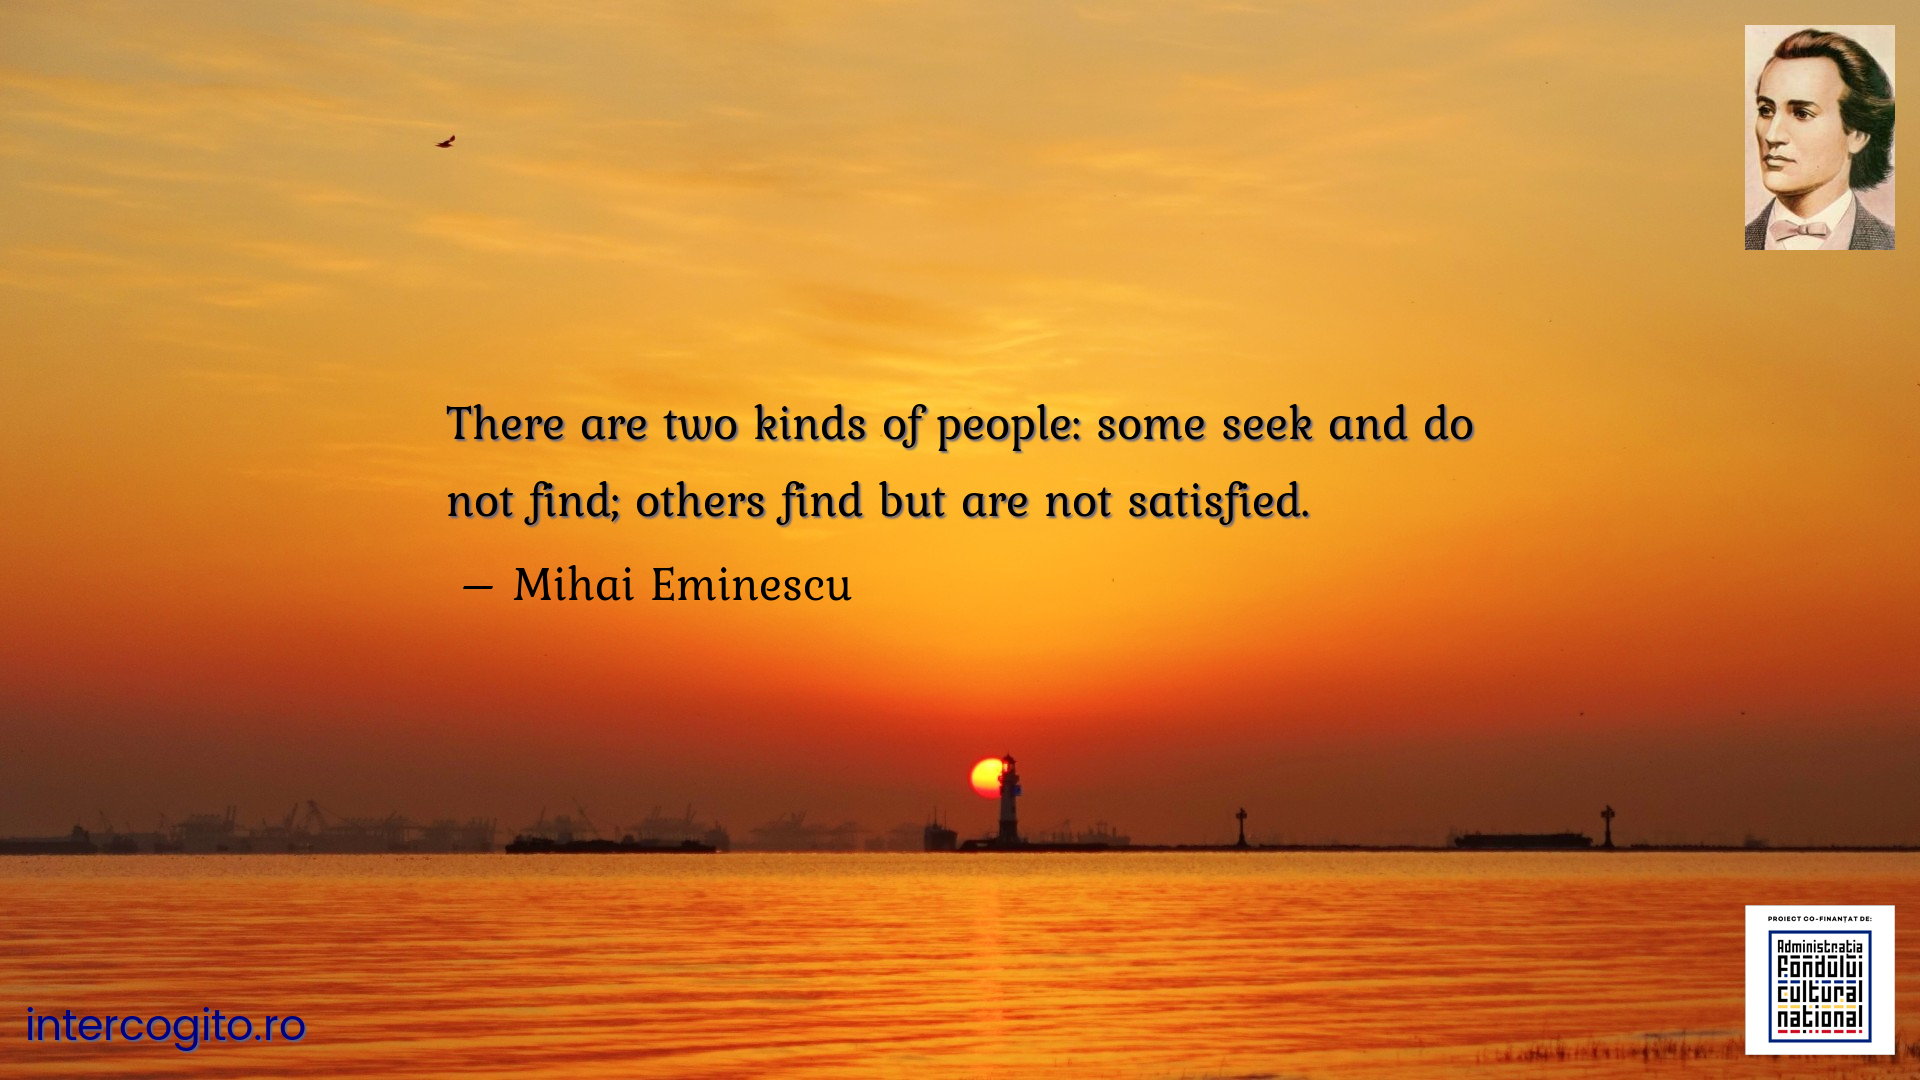 There are two kinds of people: some seek and do not find; others find but are not satisfied.